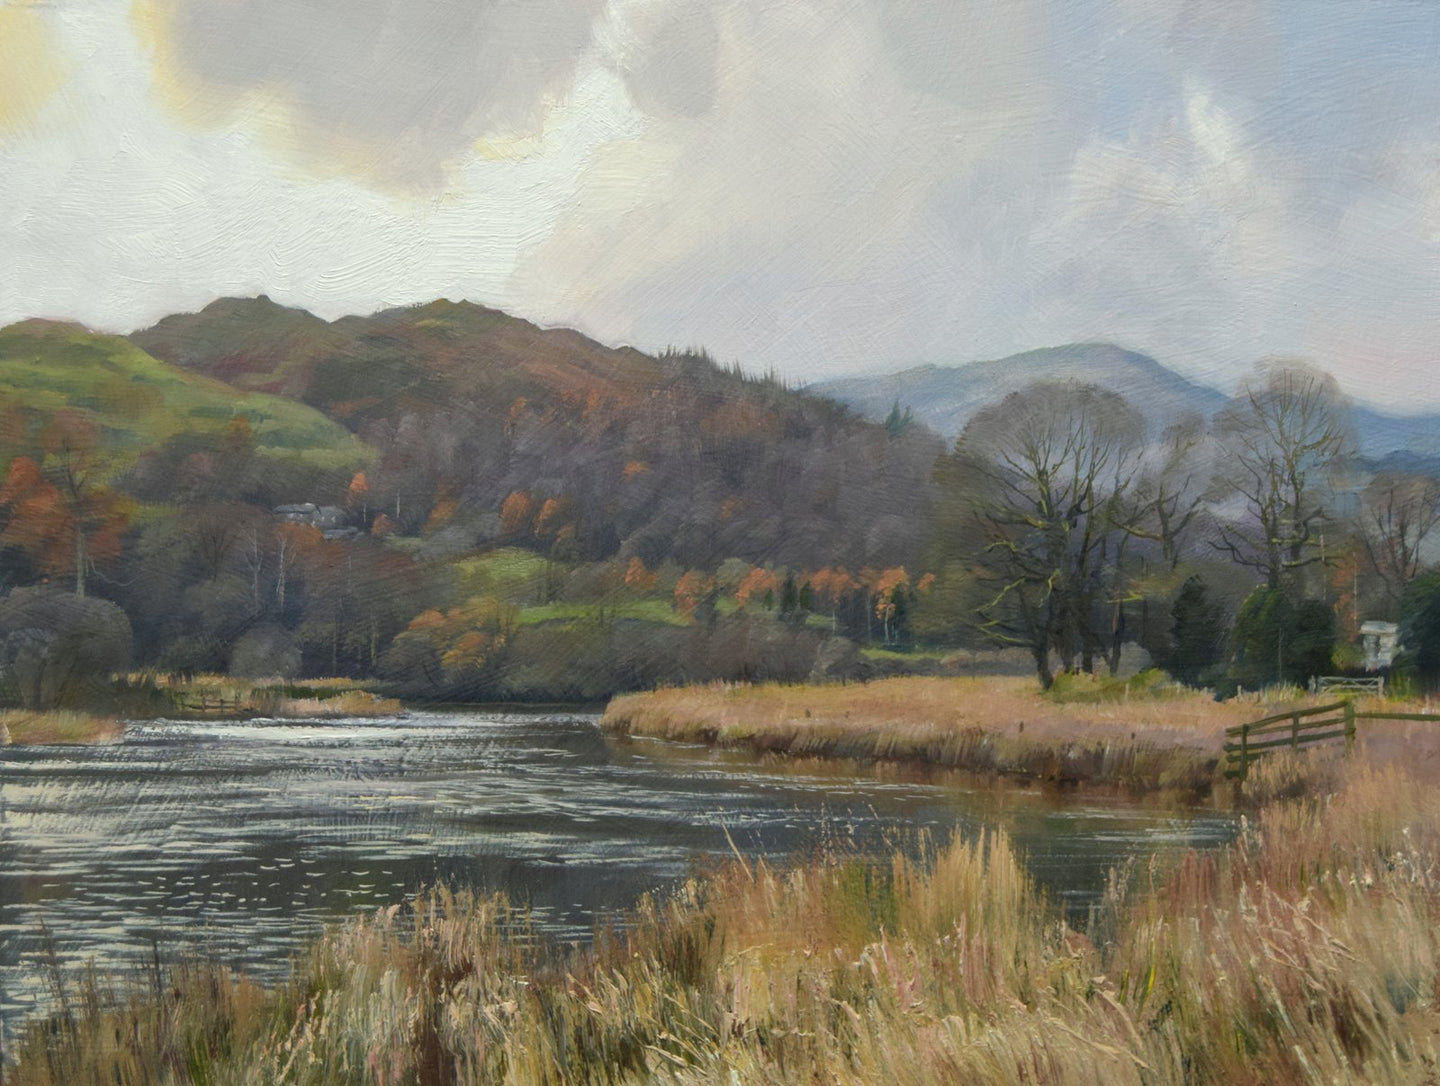 Oil of the River Brathay in the Lakes in Winter, bare trees, brown vegetation, sun breaking through above the distant mountains